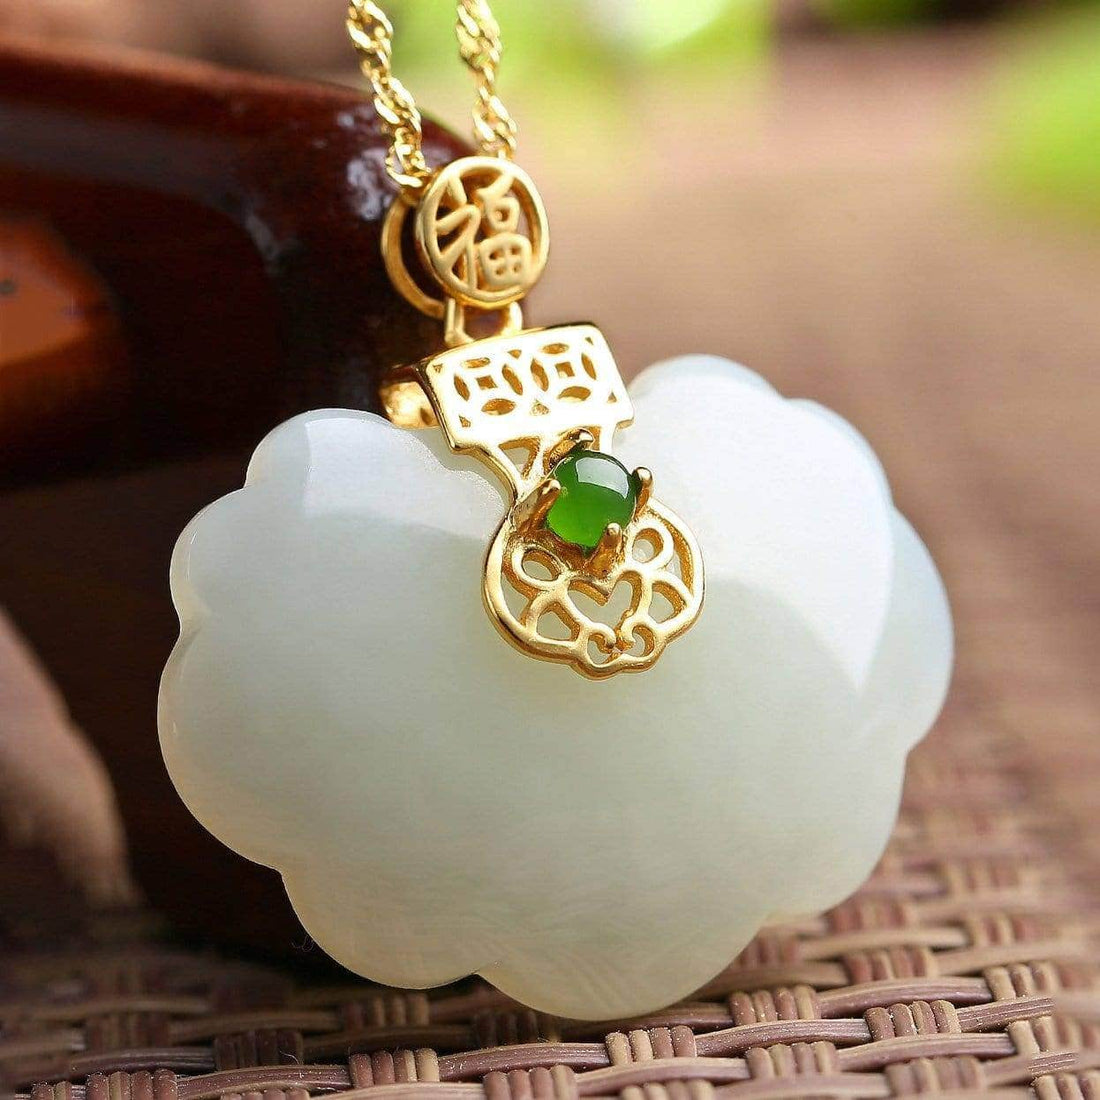 Baikalla Jewelry Silver Gemstone Necklace Pendant Only Genuine White Jade RuYi Pendant Necklace  with 14K Yellow Solid Gold Bail